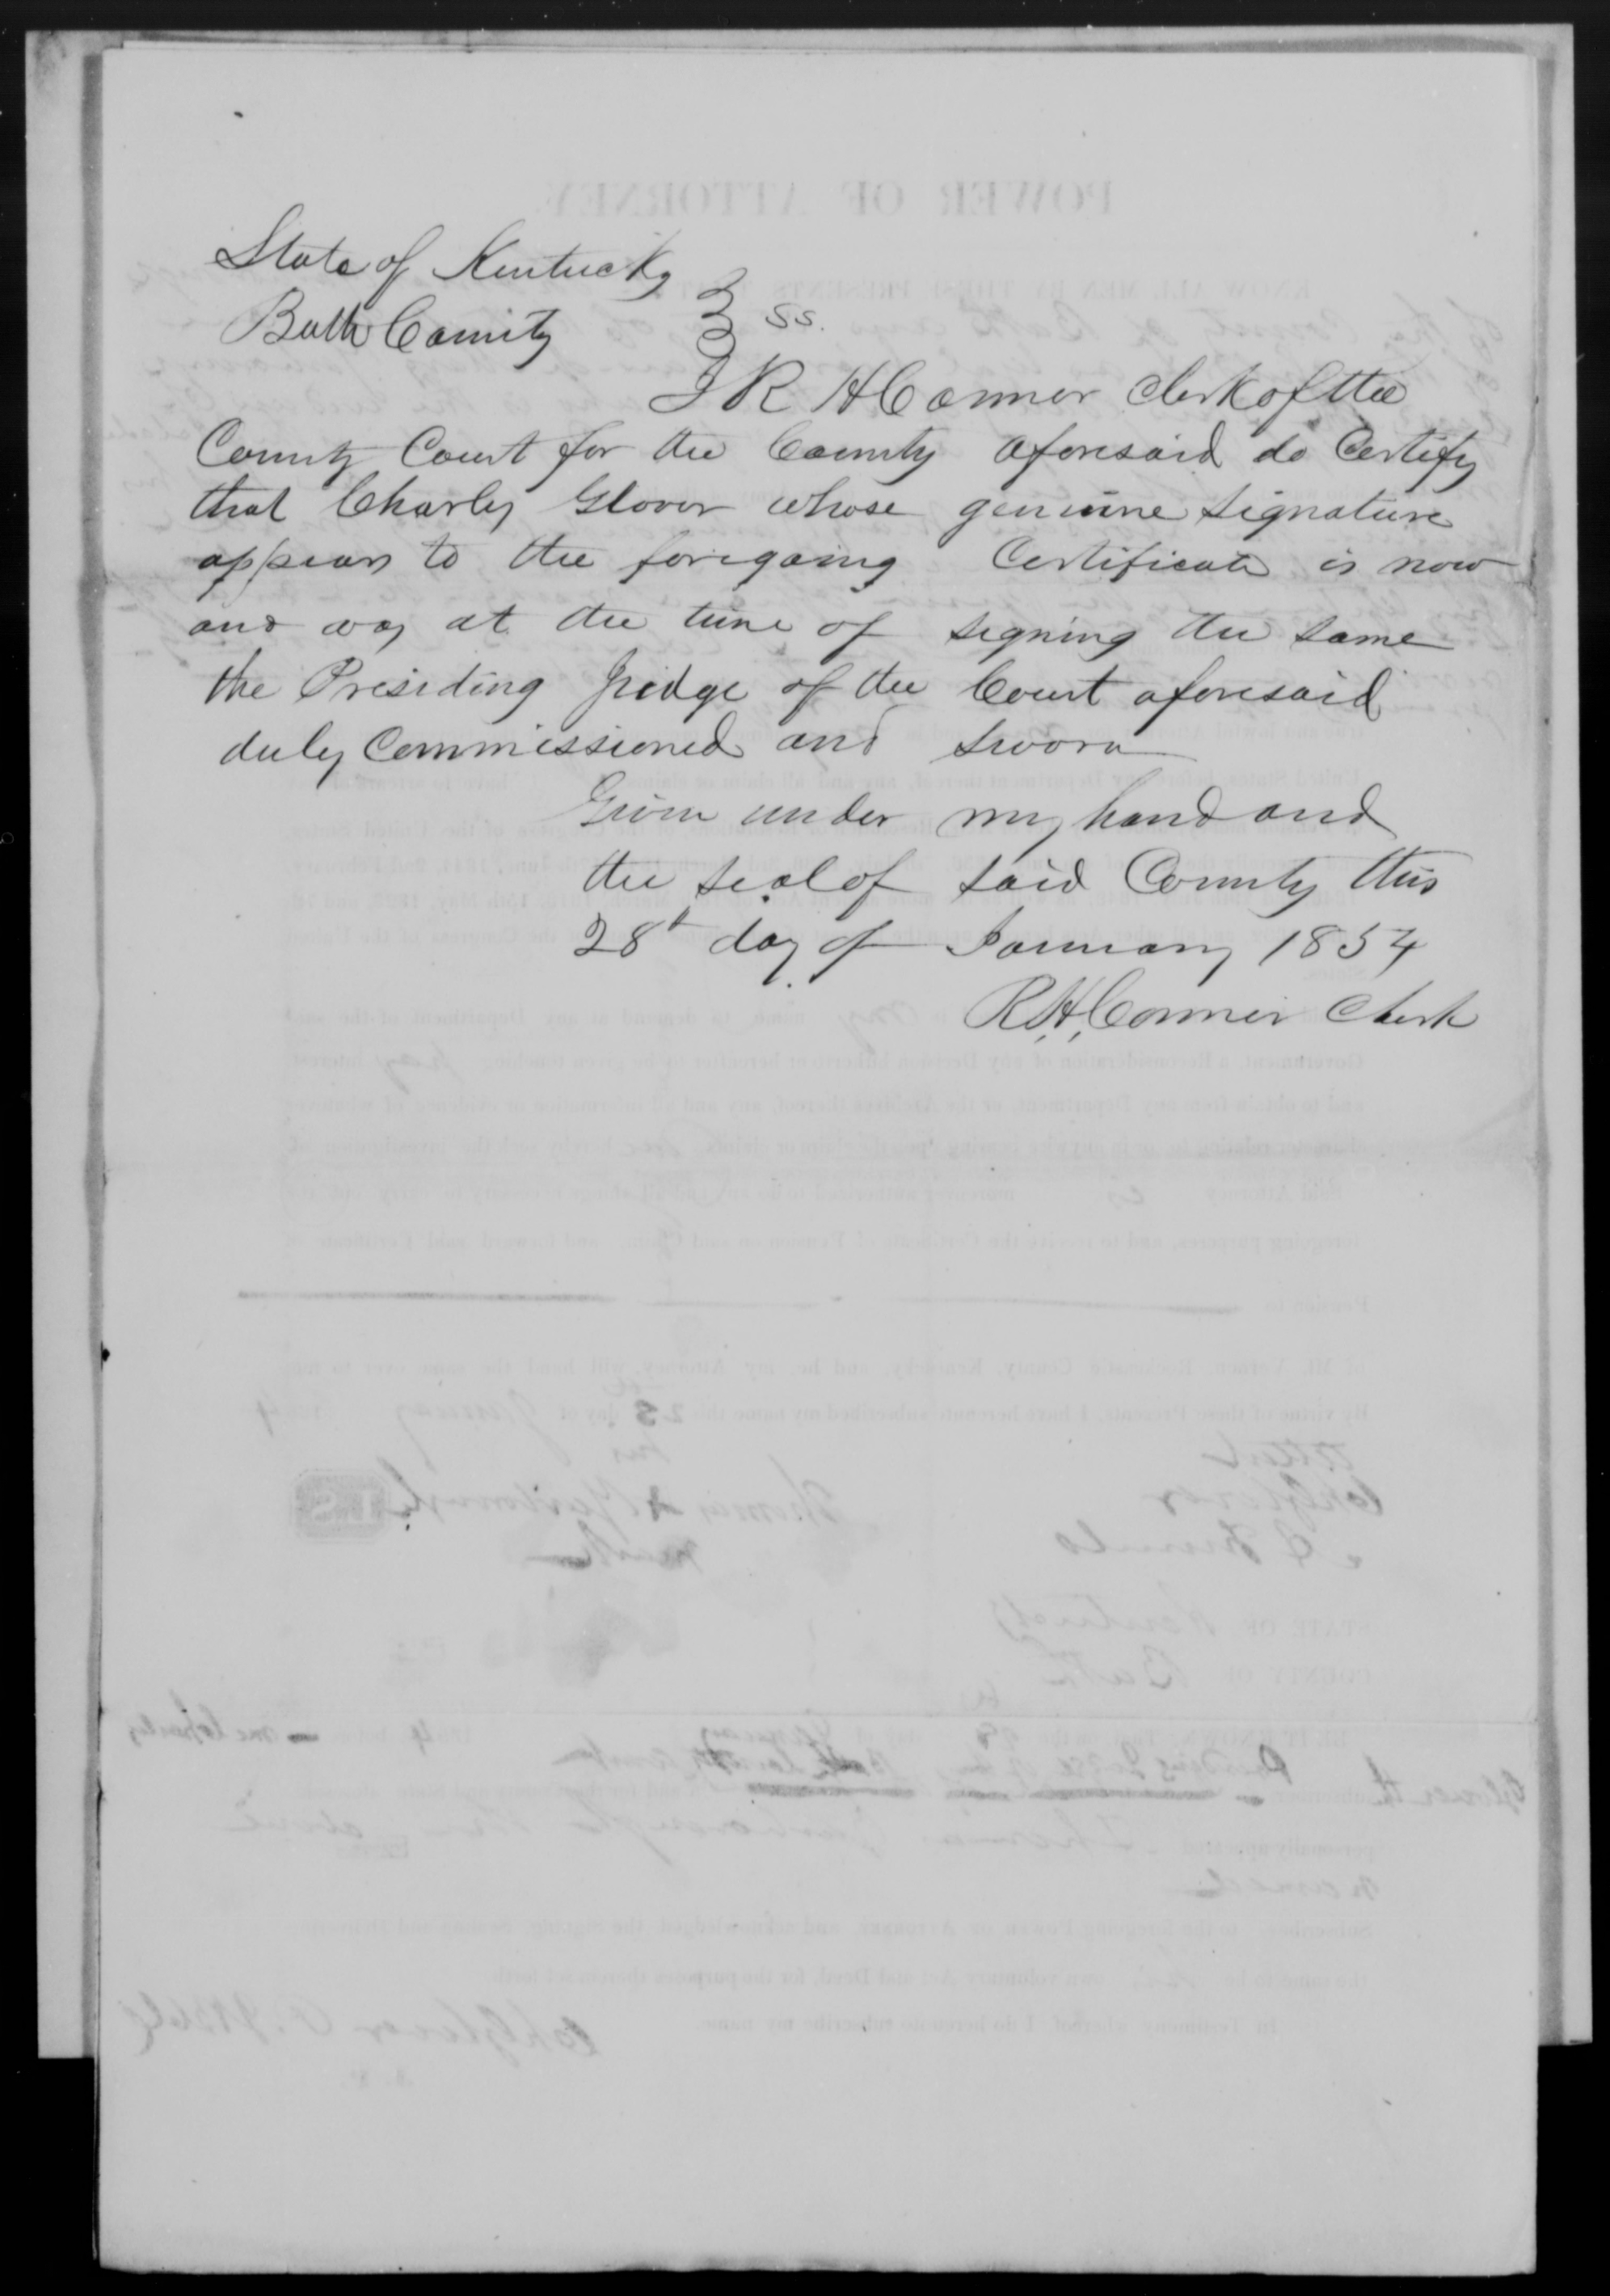 Appointment of John S. Edwards as Thomas Yarborough's Power of Attorney, 28 January 1854, page 2